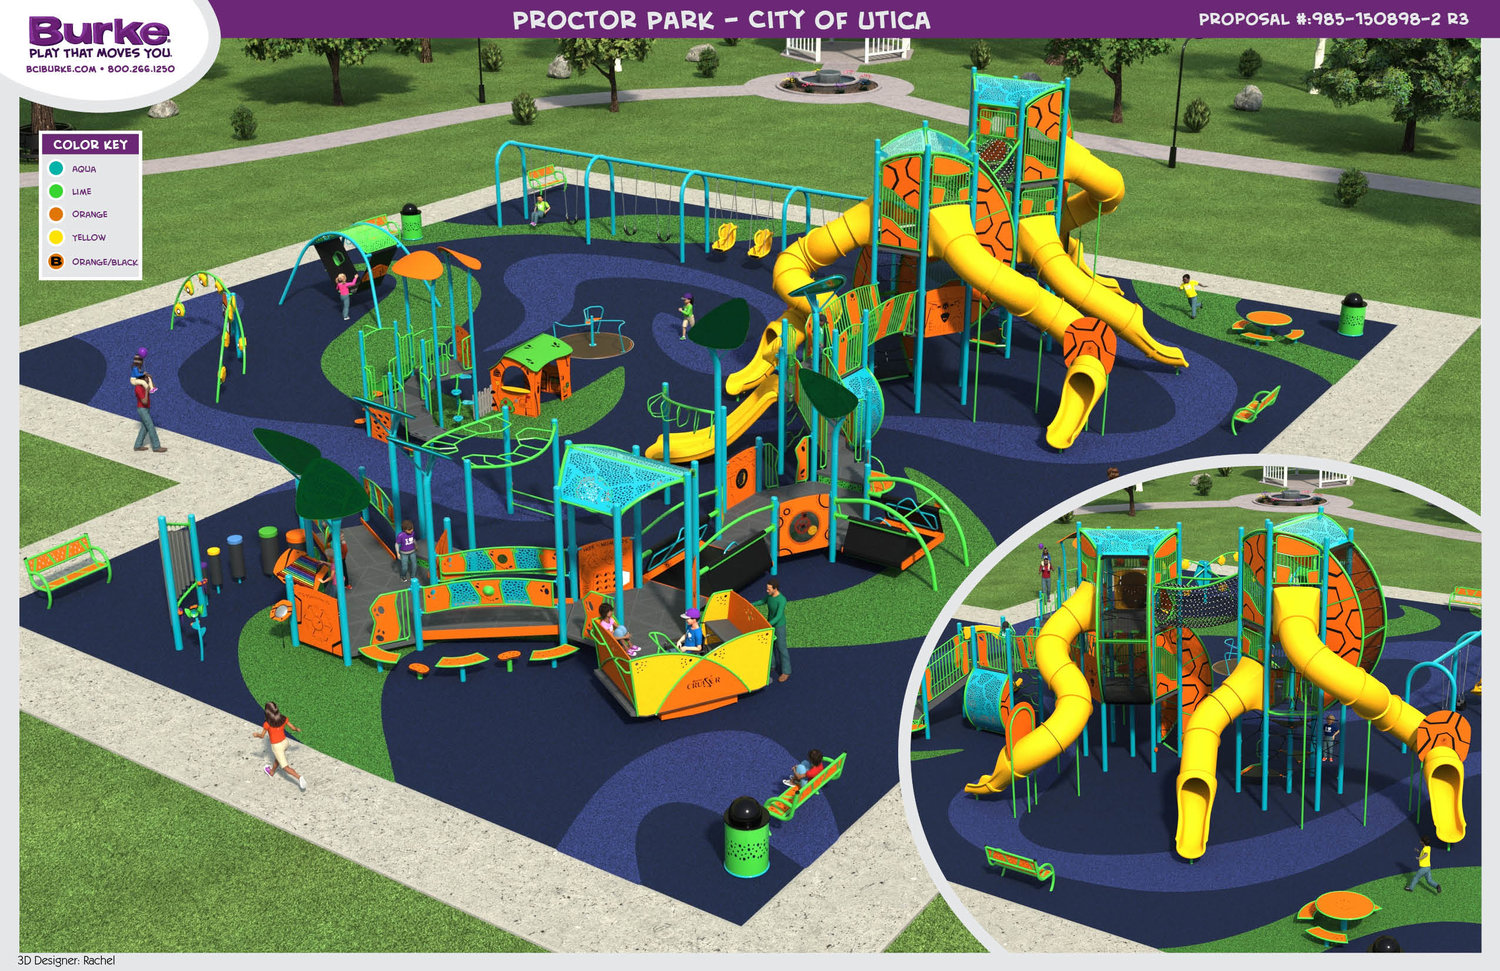 New playground deliberate for TR Proctor Park as a number of upgrades